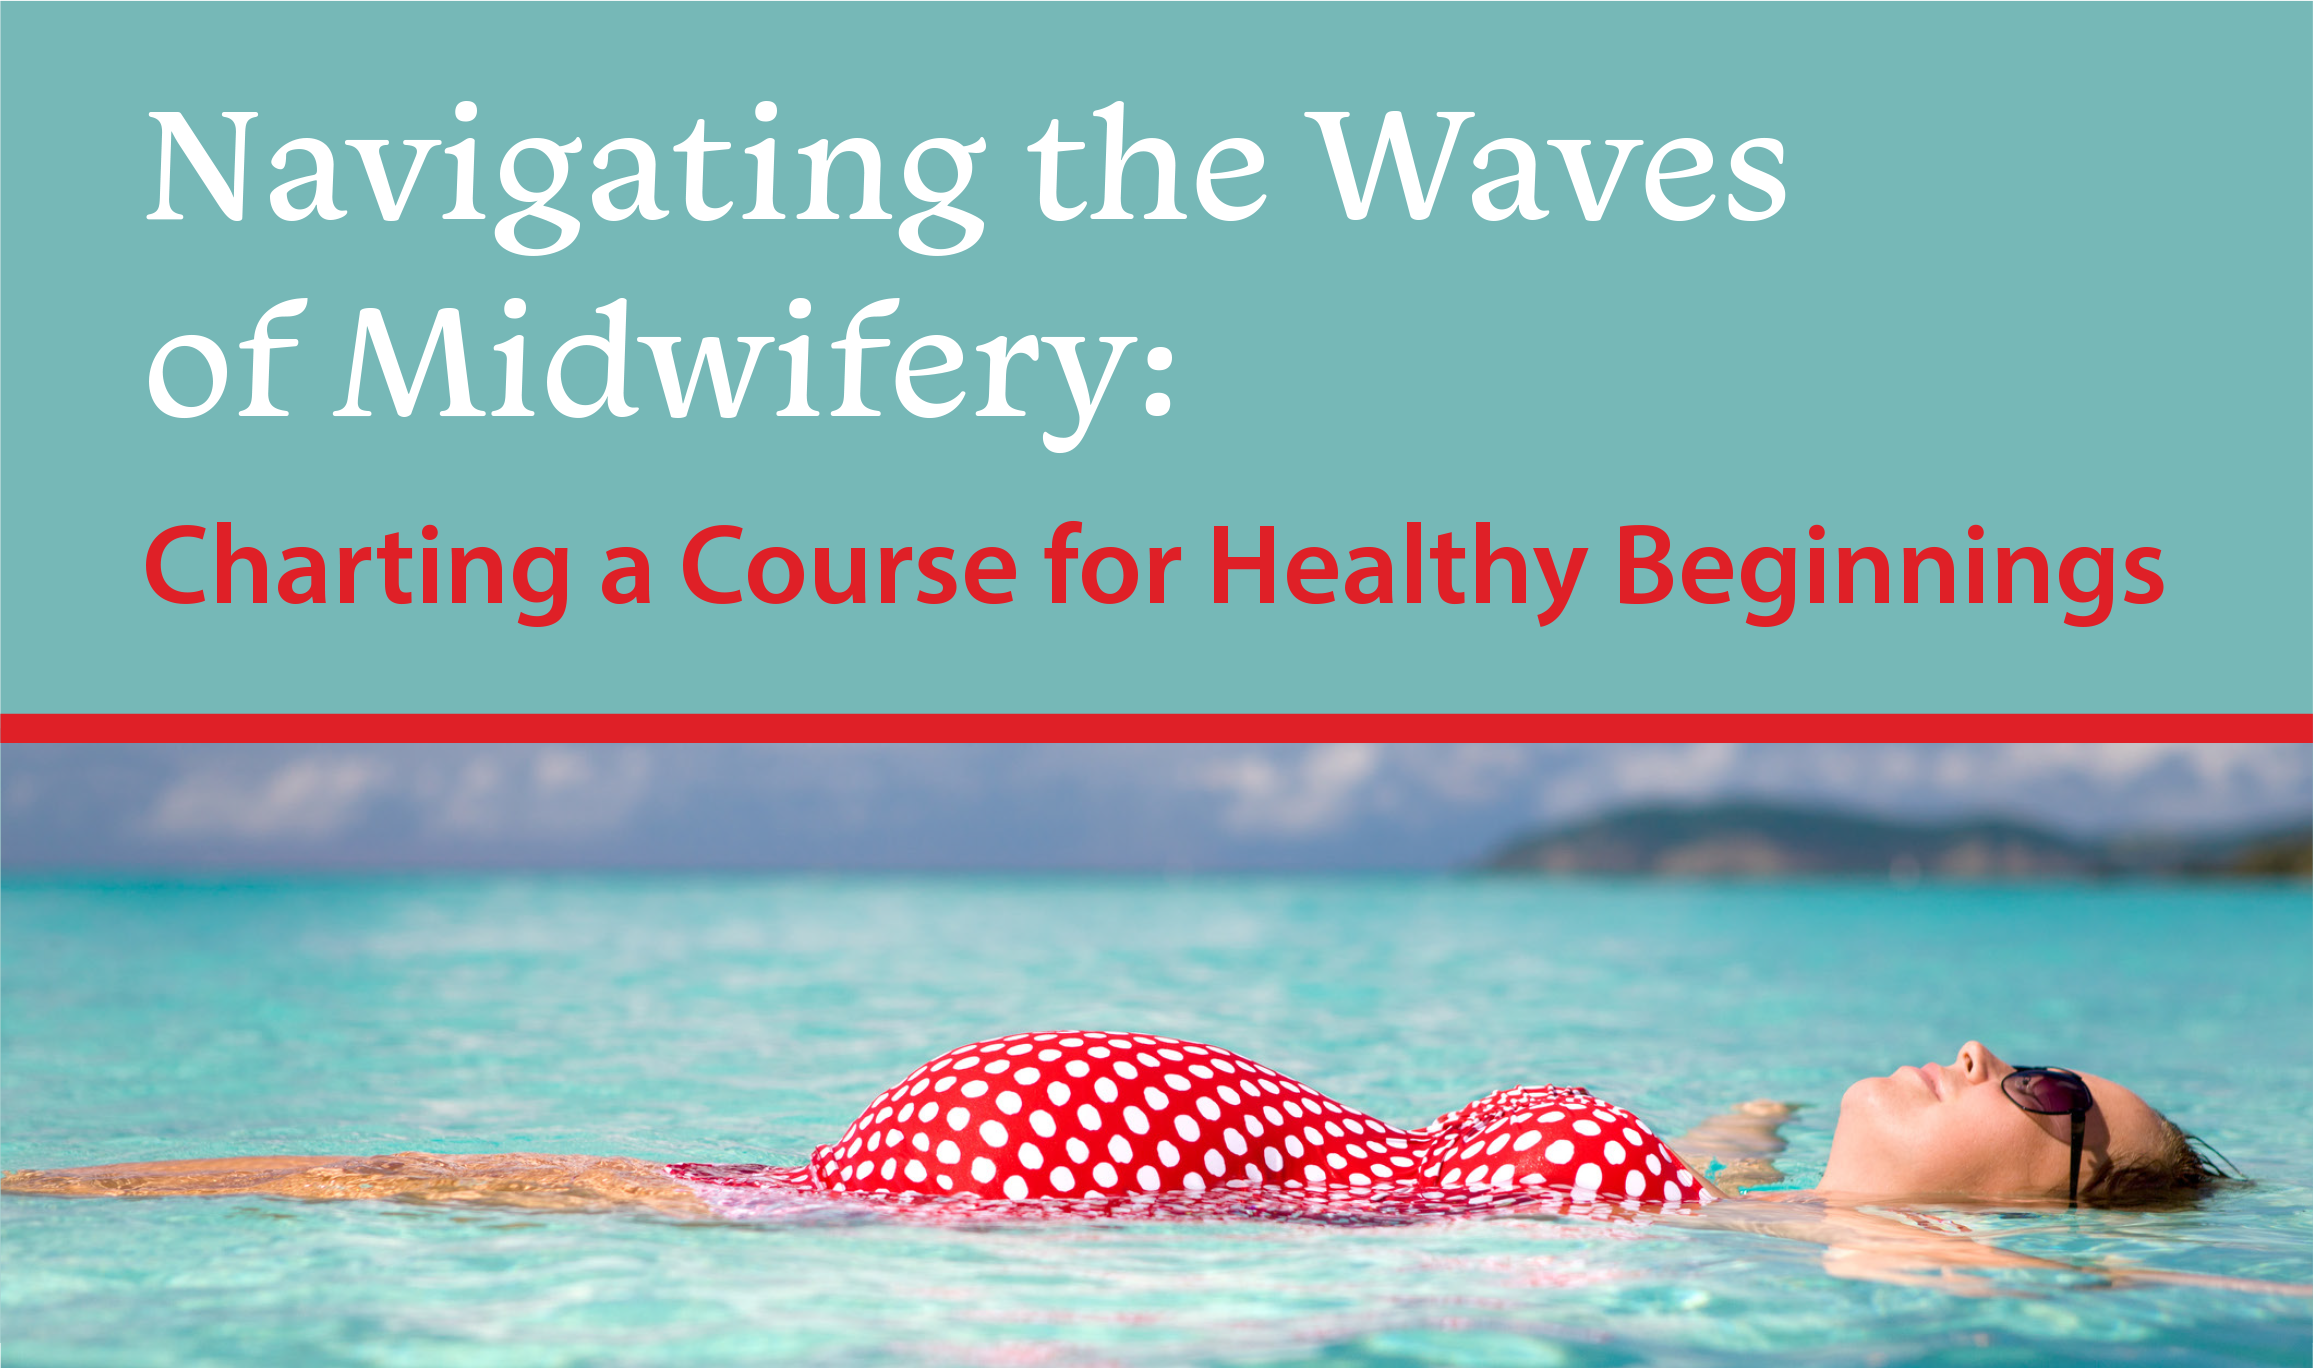 Navigating the Waves of Midwifery